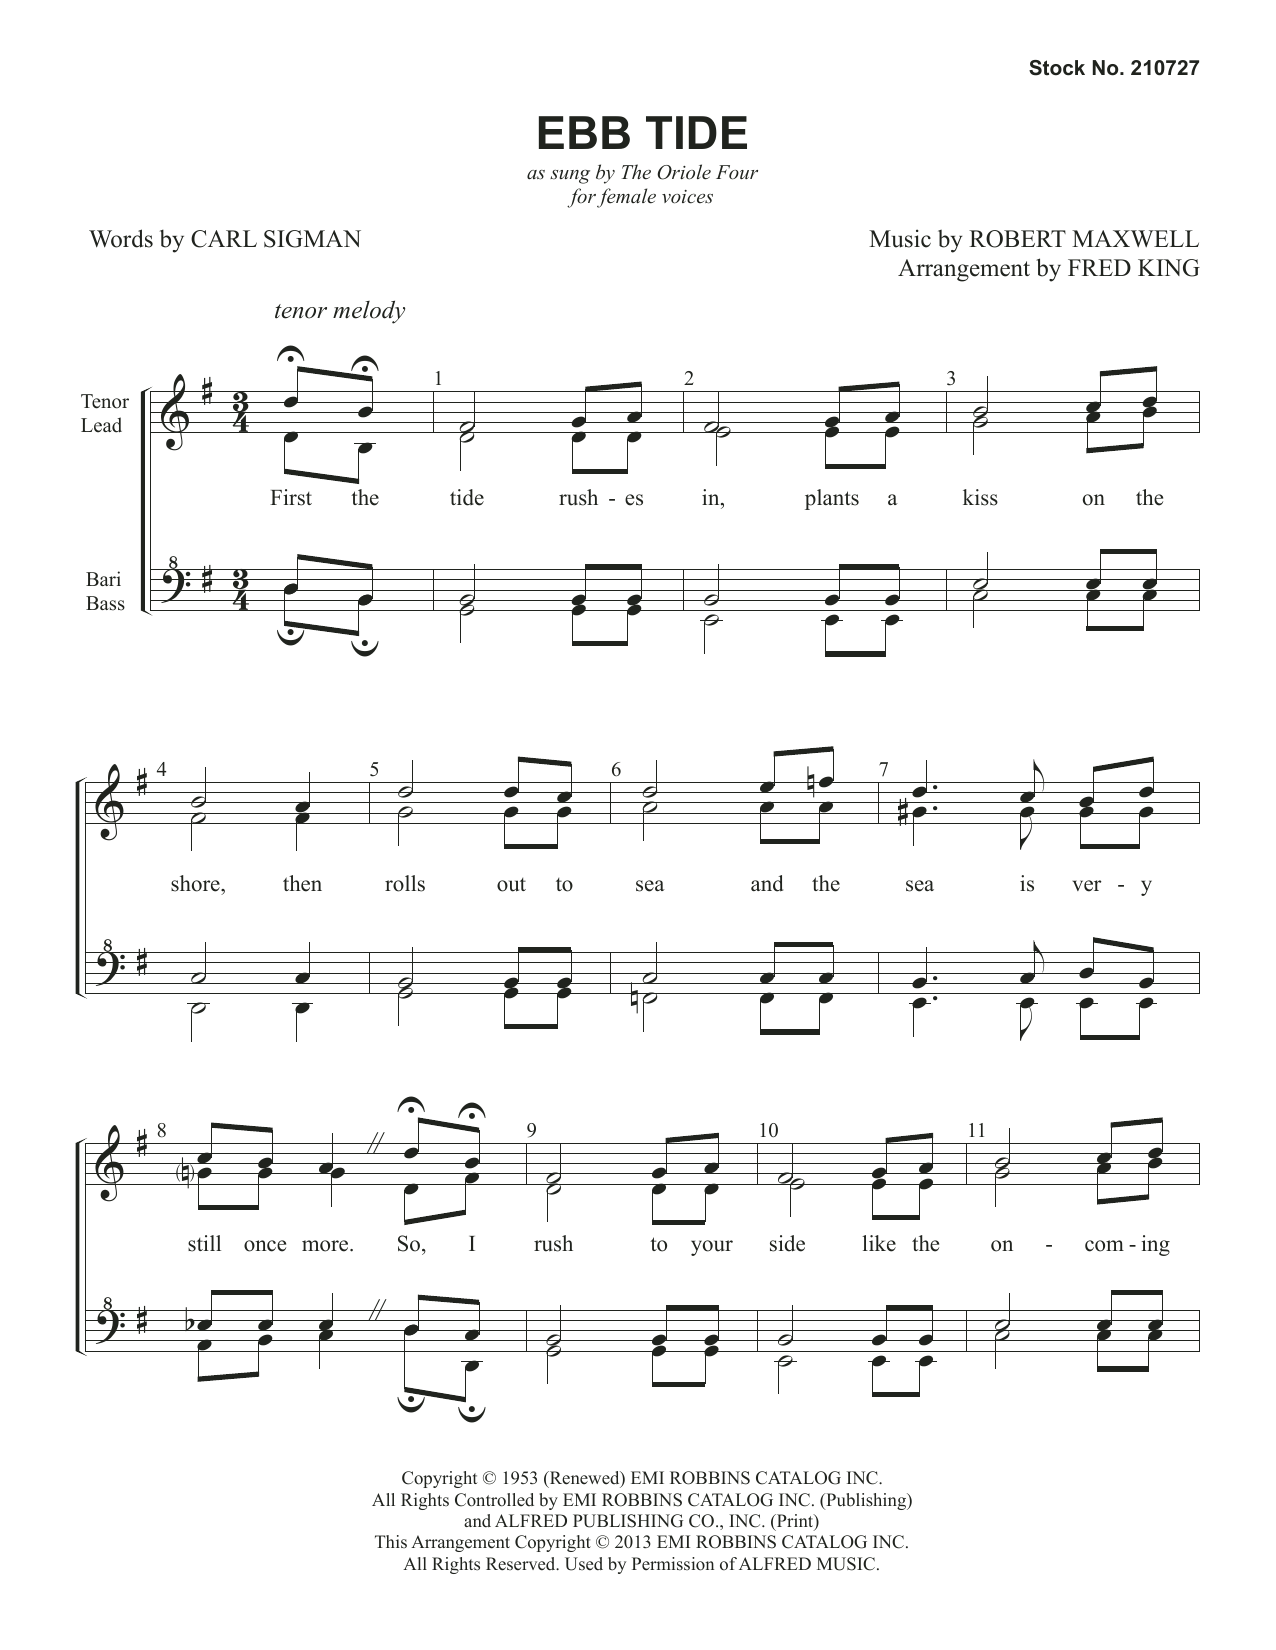 Download The Oriole Four Ebb Tide (arr. Fred King) Sheet Music